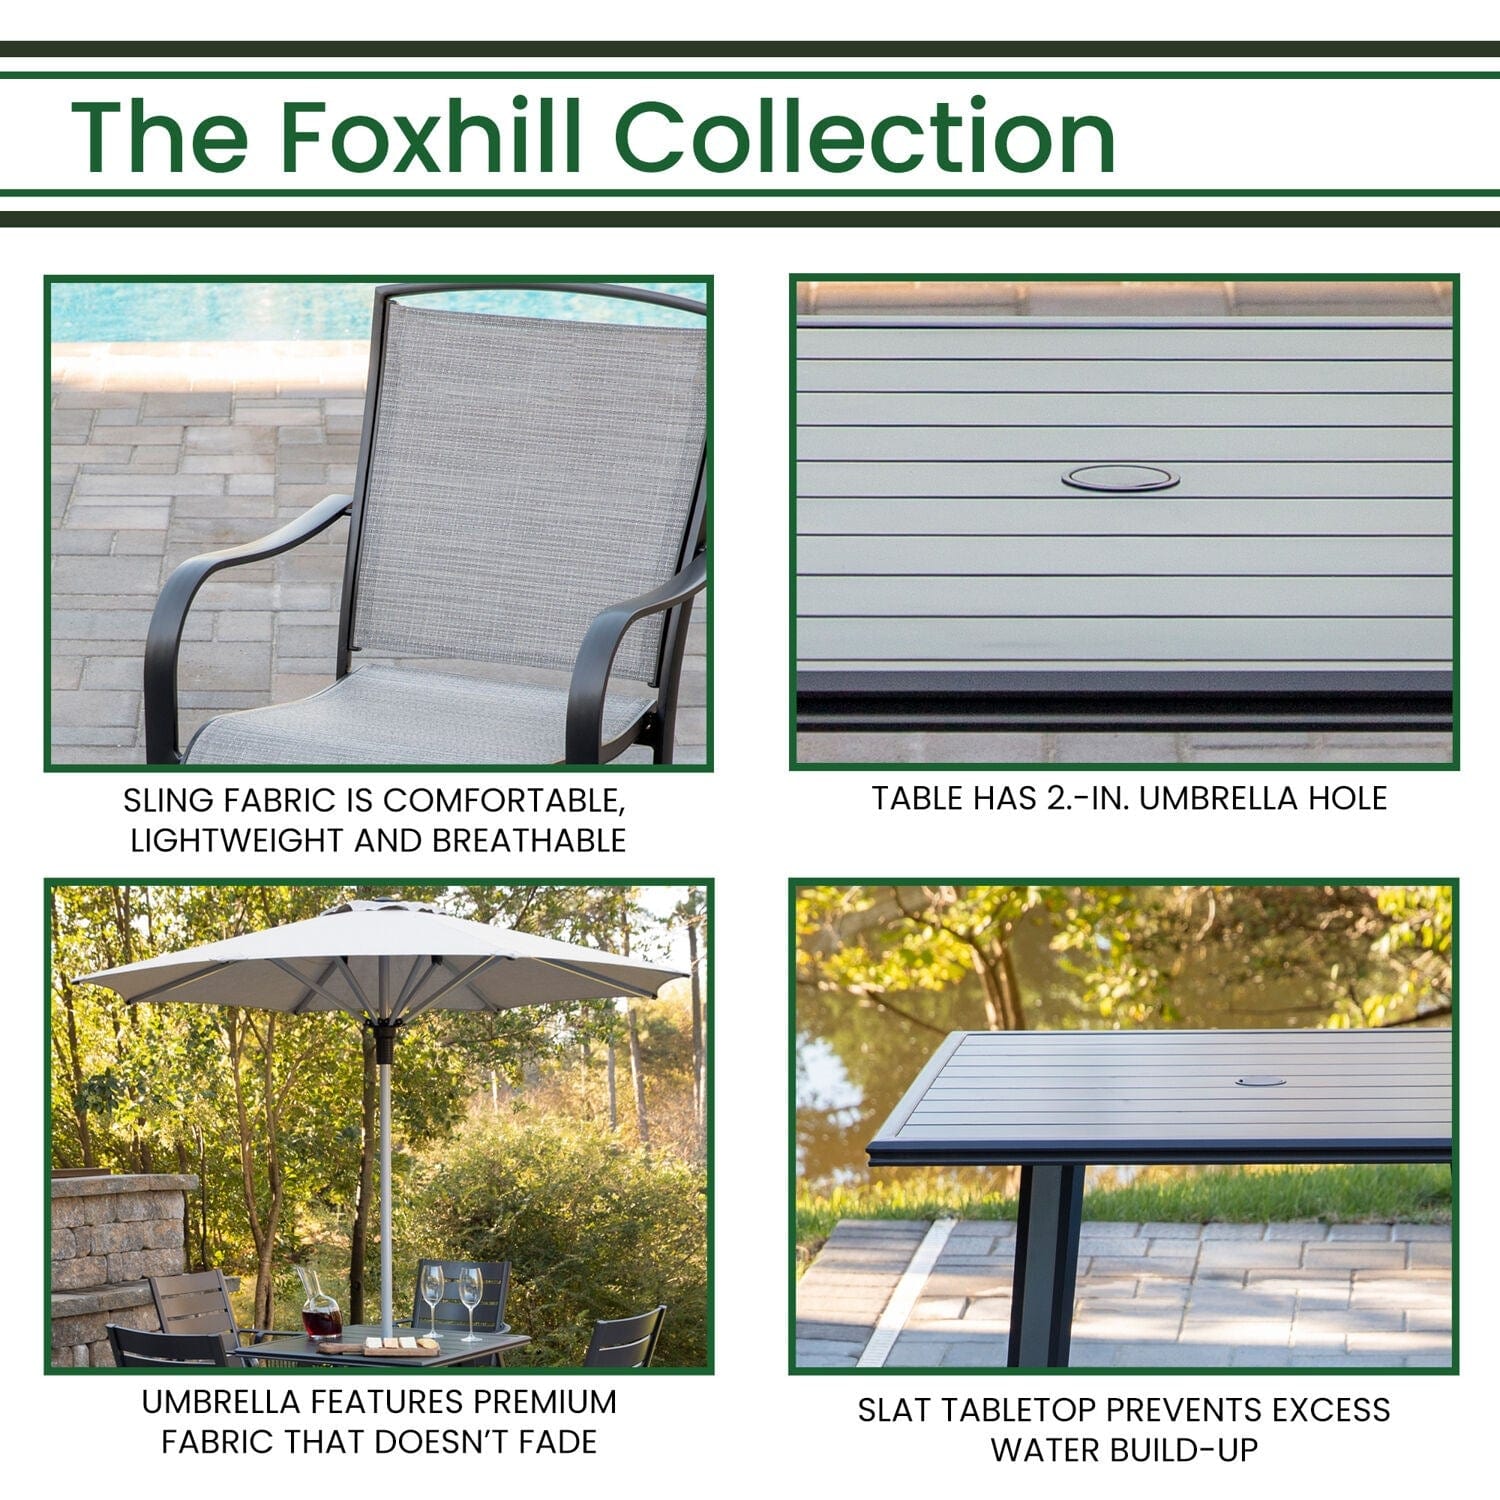 Hanover Outdoor Dining Set Hanover Foxhill 5-Piece Commercial-Grade Patio Dining Set with 4 Sling Dining Chairs, 38-in. Square Slat-Top Table, Umbrella and Base | FOXDN5PCS-G-SU